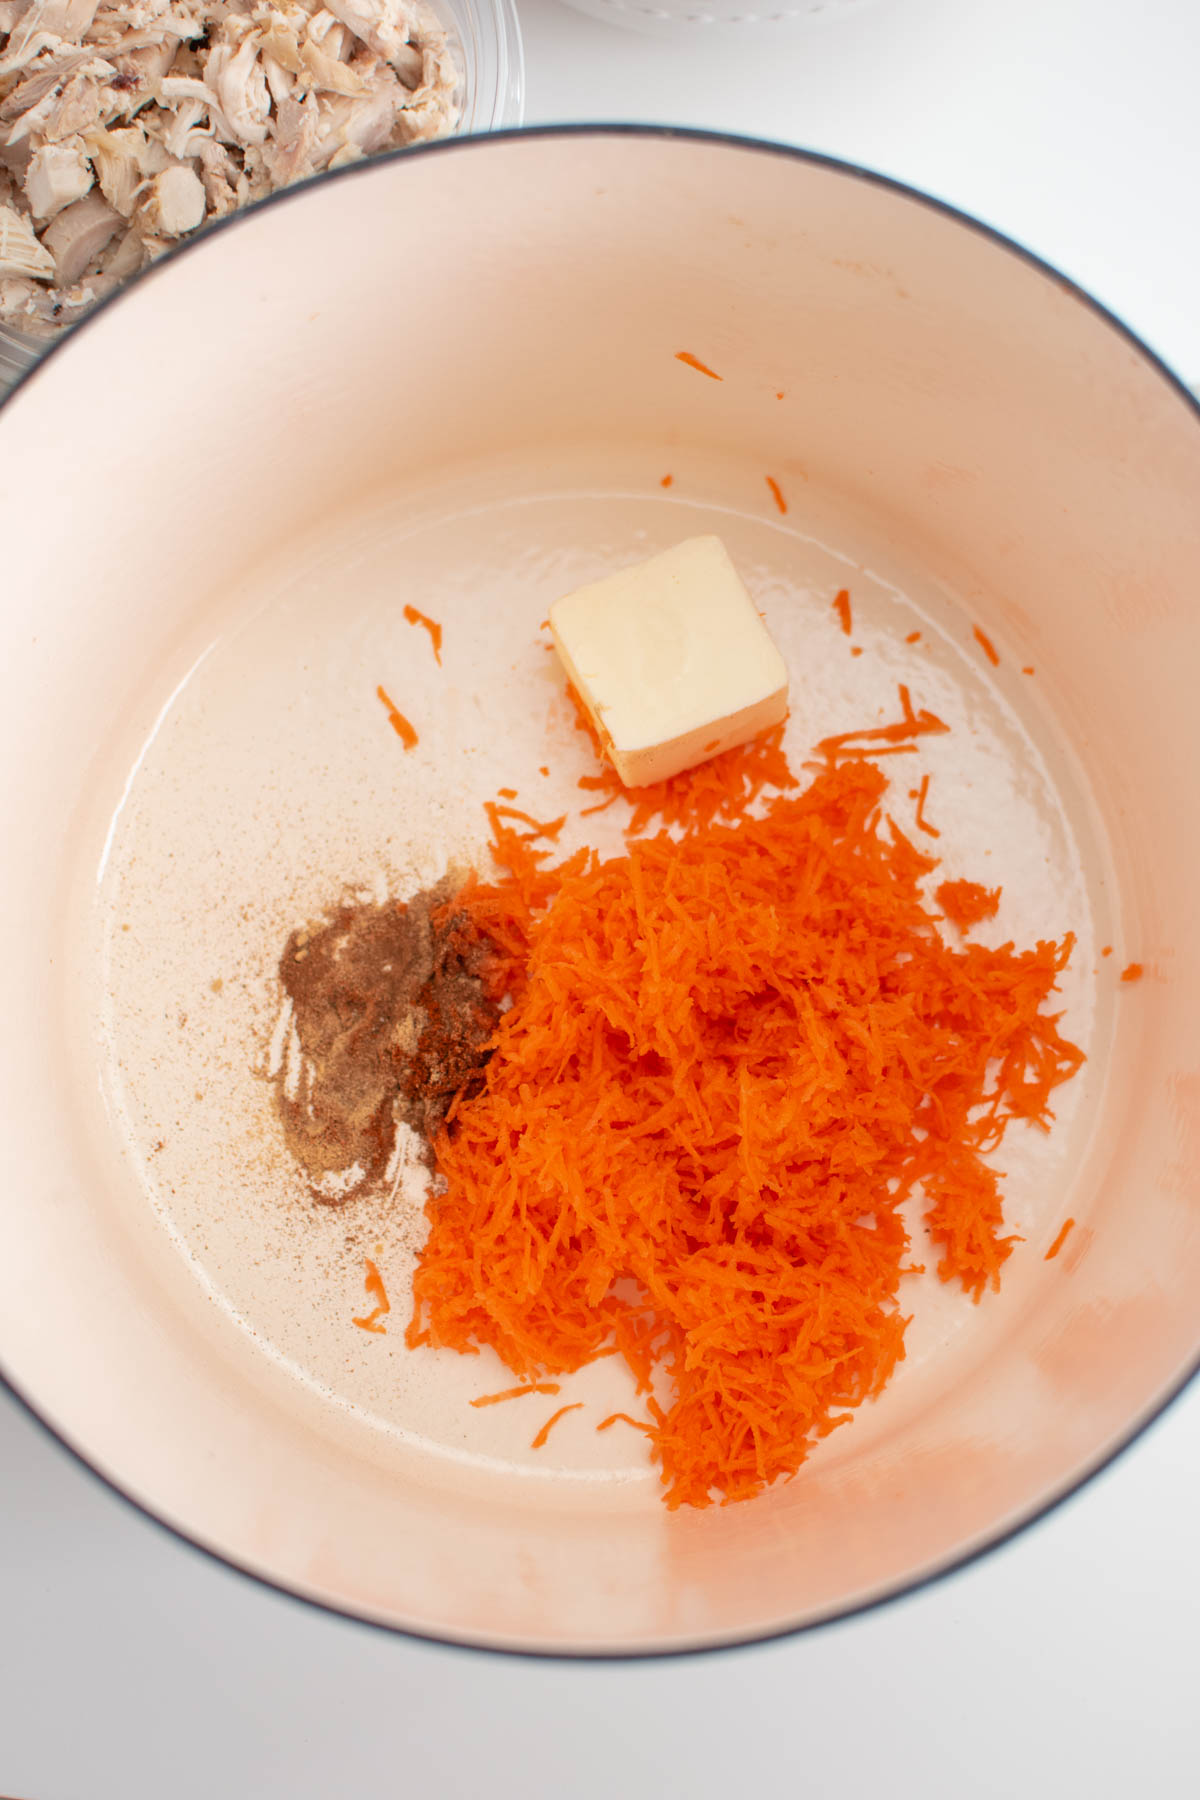 Shredded carrot, butter, and spices in large dutch oven.